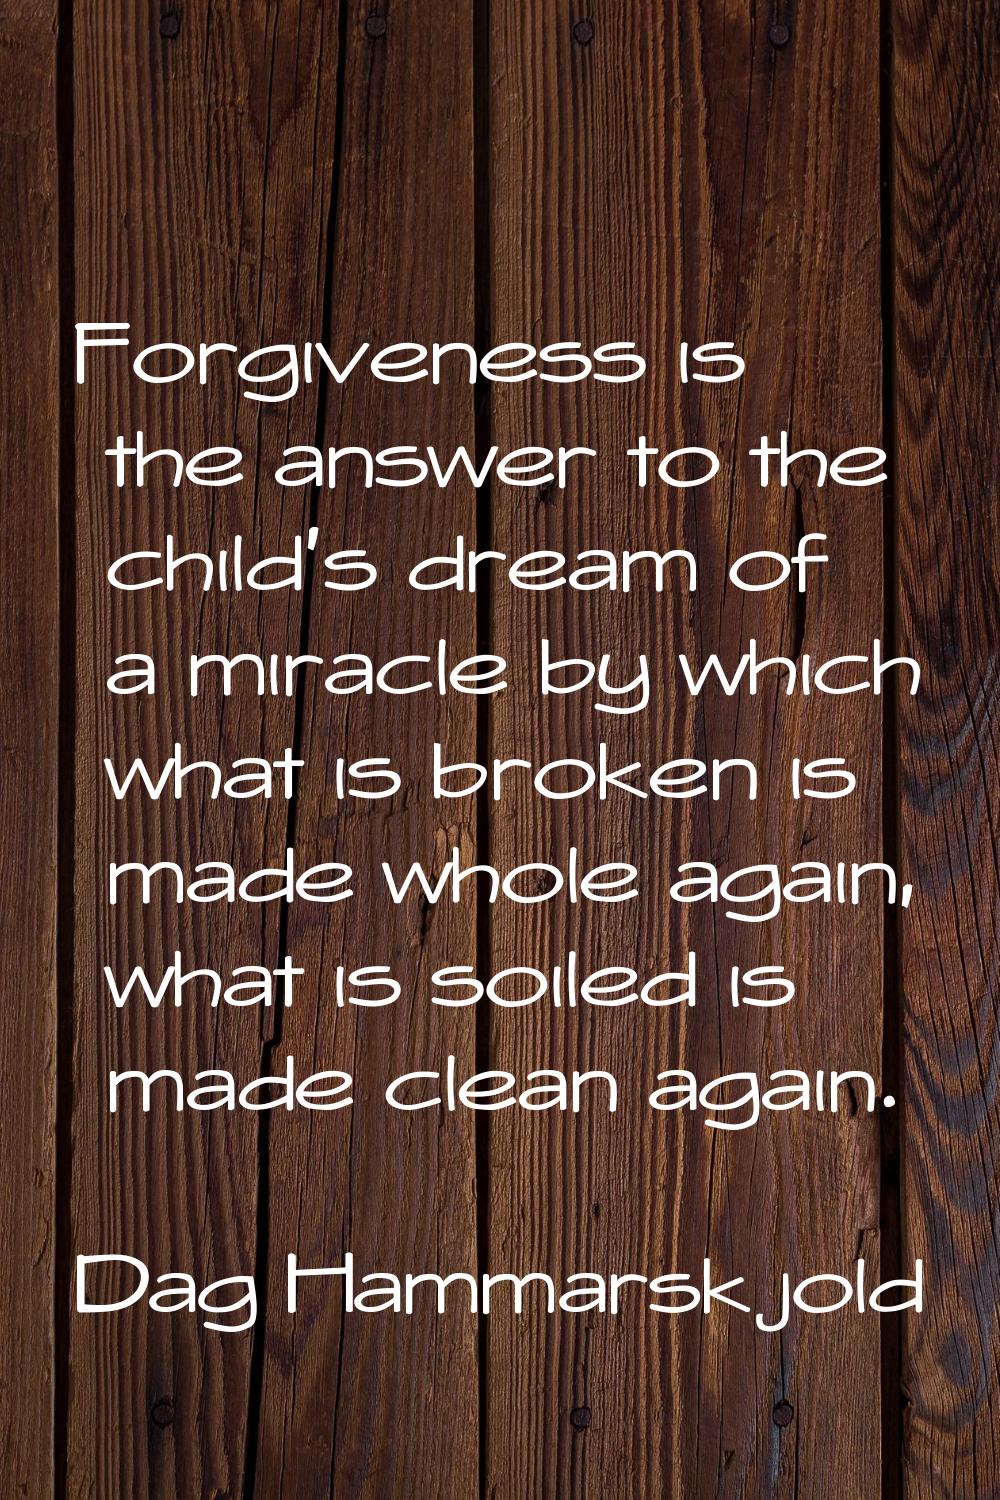 Forgiveness is the answer to the child's dream of a miracle by which what is broken is made whole a